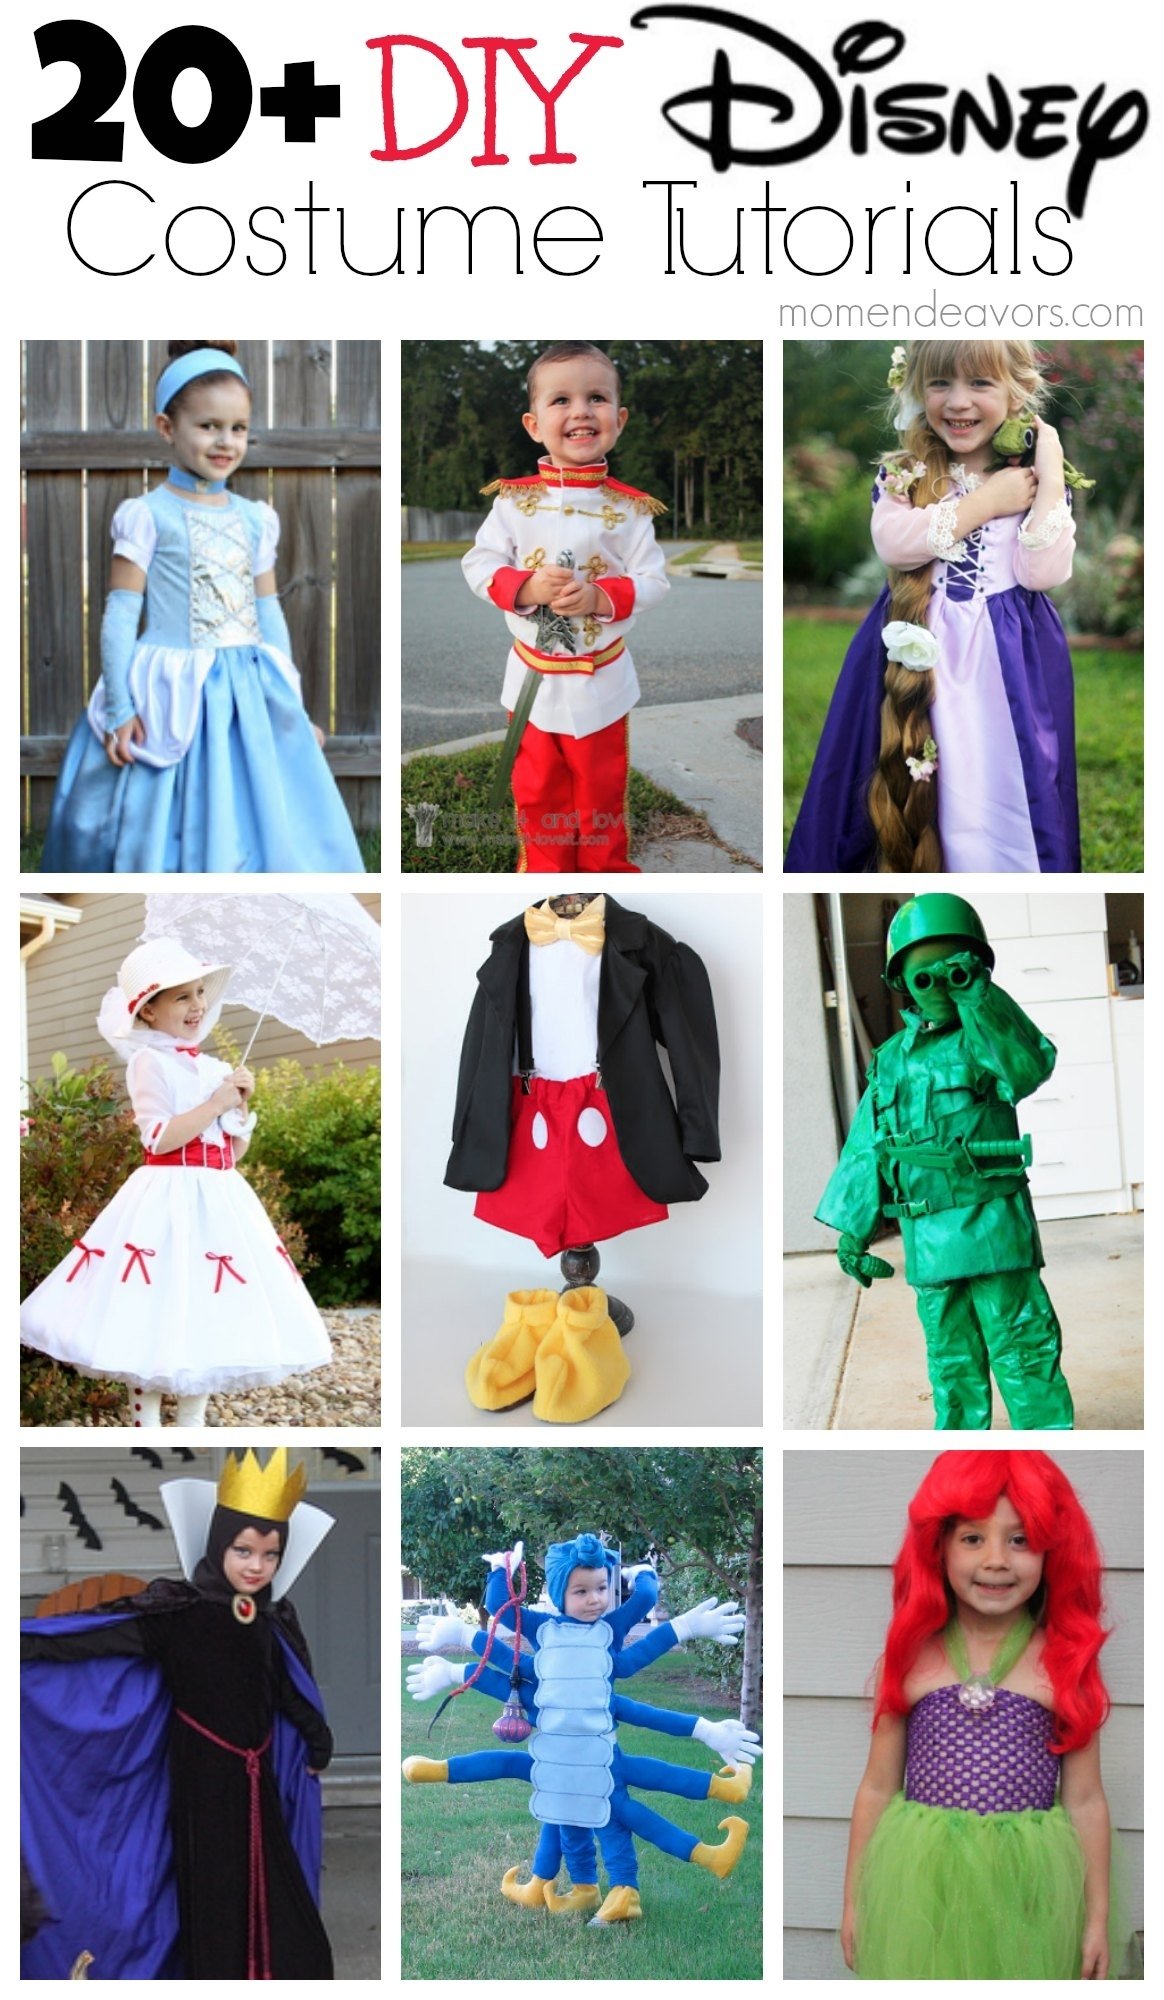 What Can I Dress Up As For Halloween | Camden DCCB